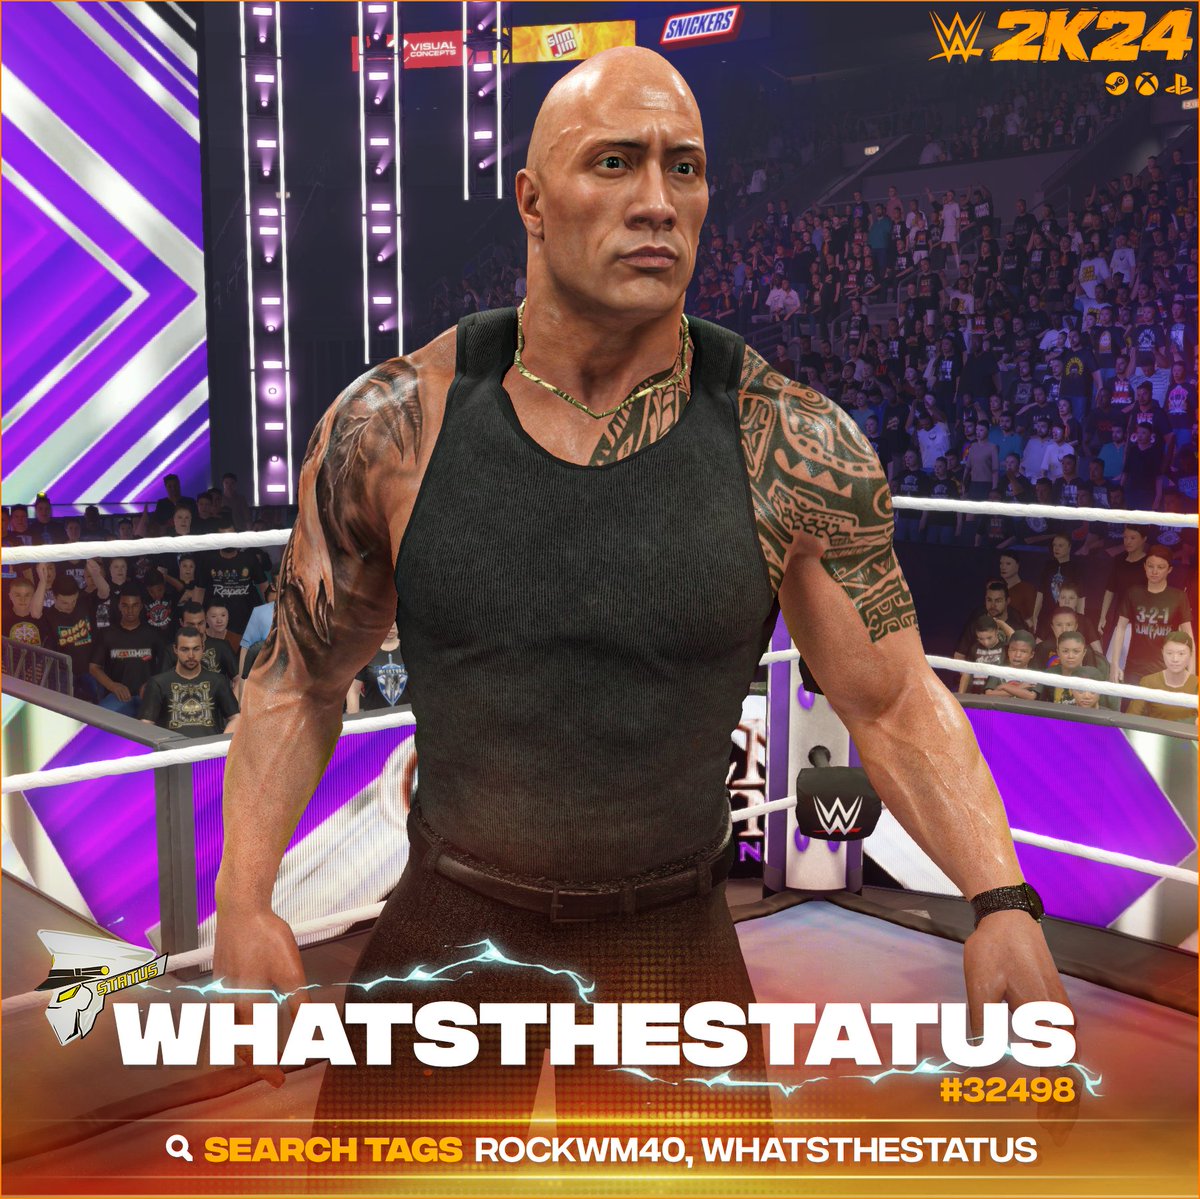 NEW! #WWE2K24 Upload To Community Creations! ★ The Rock '24 (InGame Model Edit) ★ Search Tag → ROCKWM40 or WhatsTheStatus ★ Collaboration → @GameVolt1 @PETCHYcreations ★ Support Me → linktr.ee/WhatsTheStatus ★ INCLUDES ● Custom Portrait ● Updated Entrance Motion ●